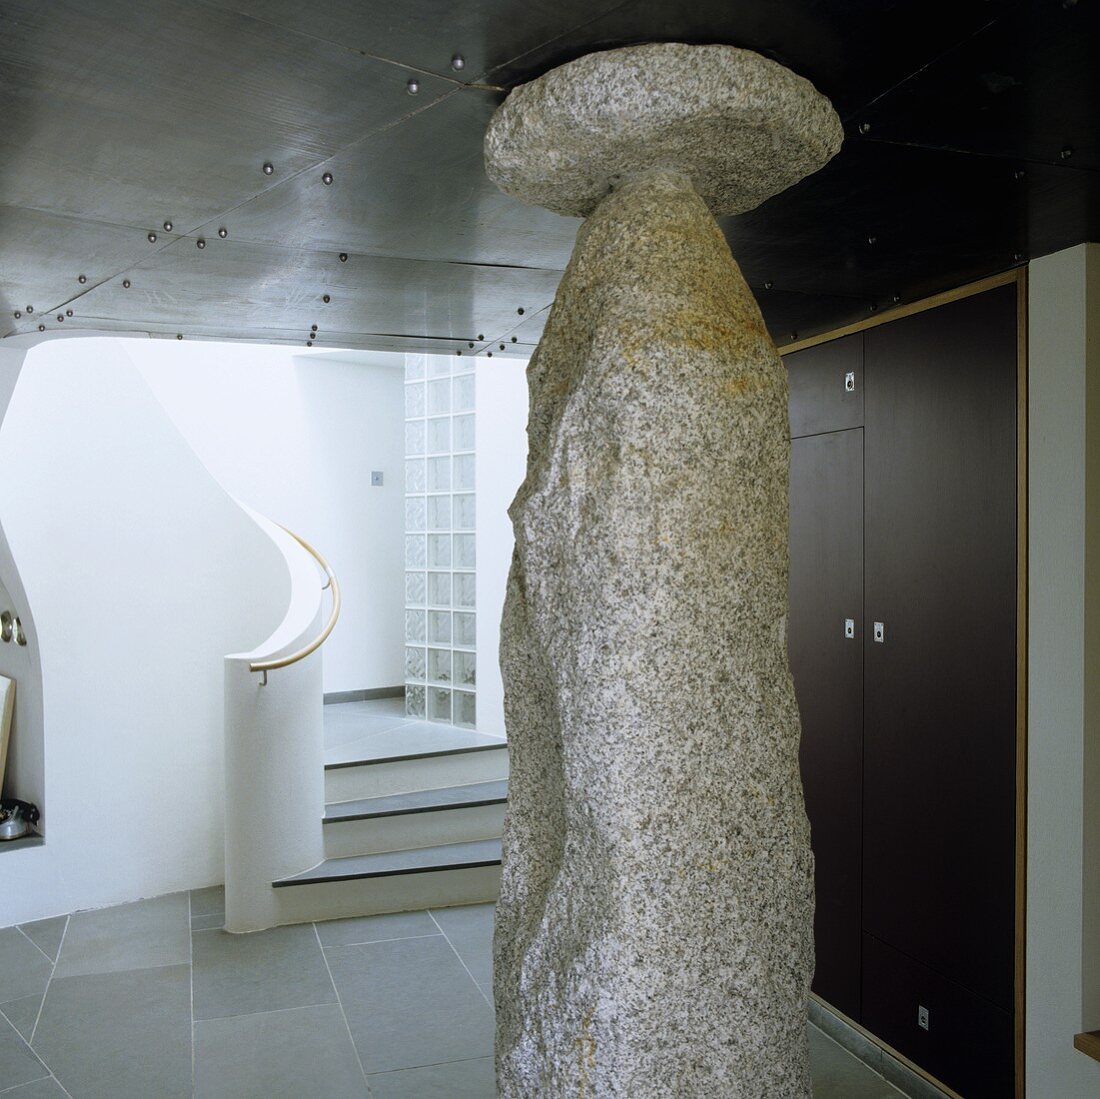 Granite sculpture in a foyer in front of a curving staircase